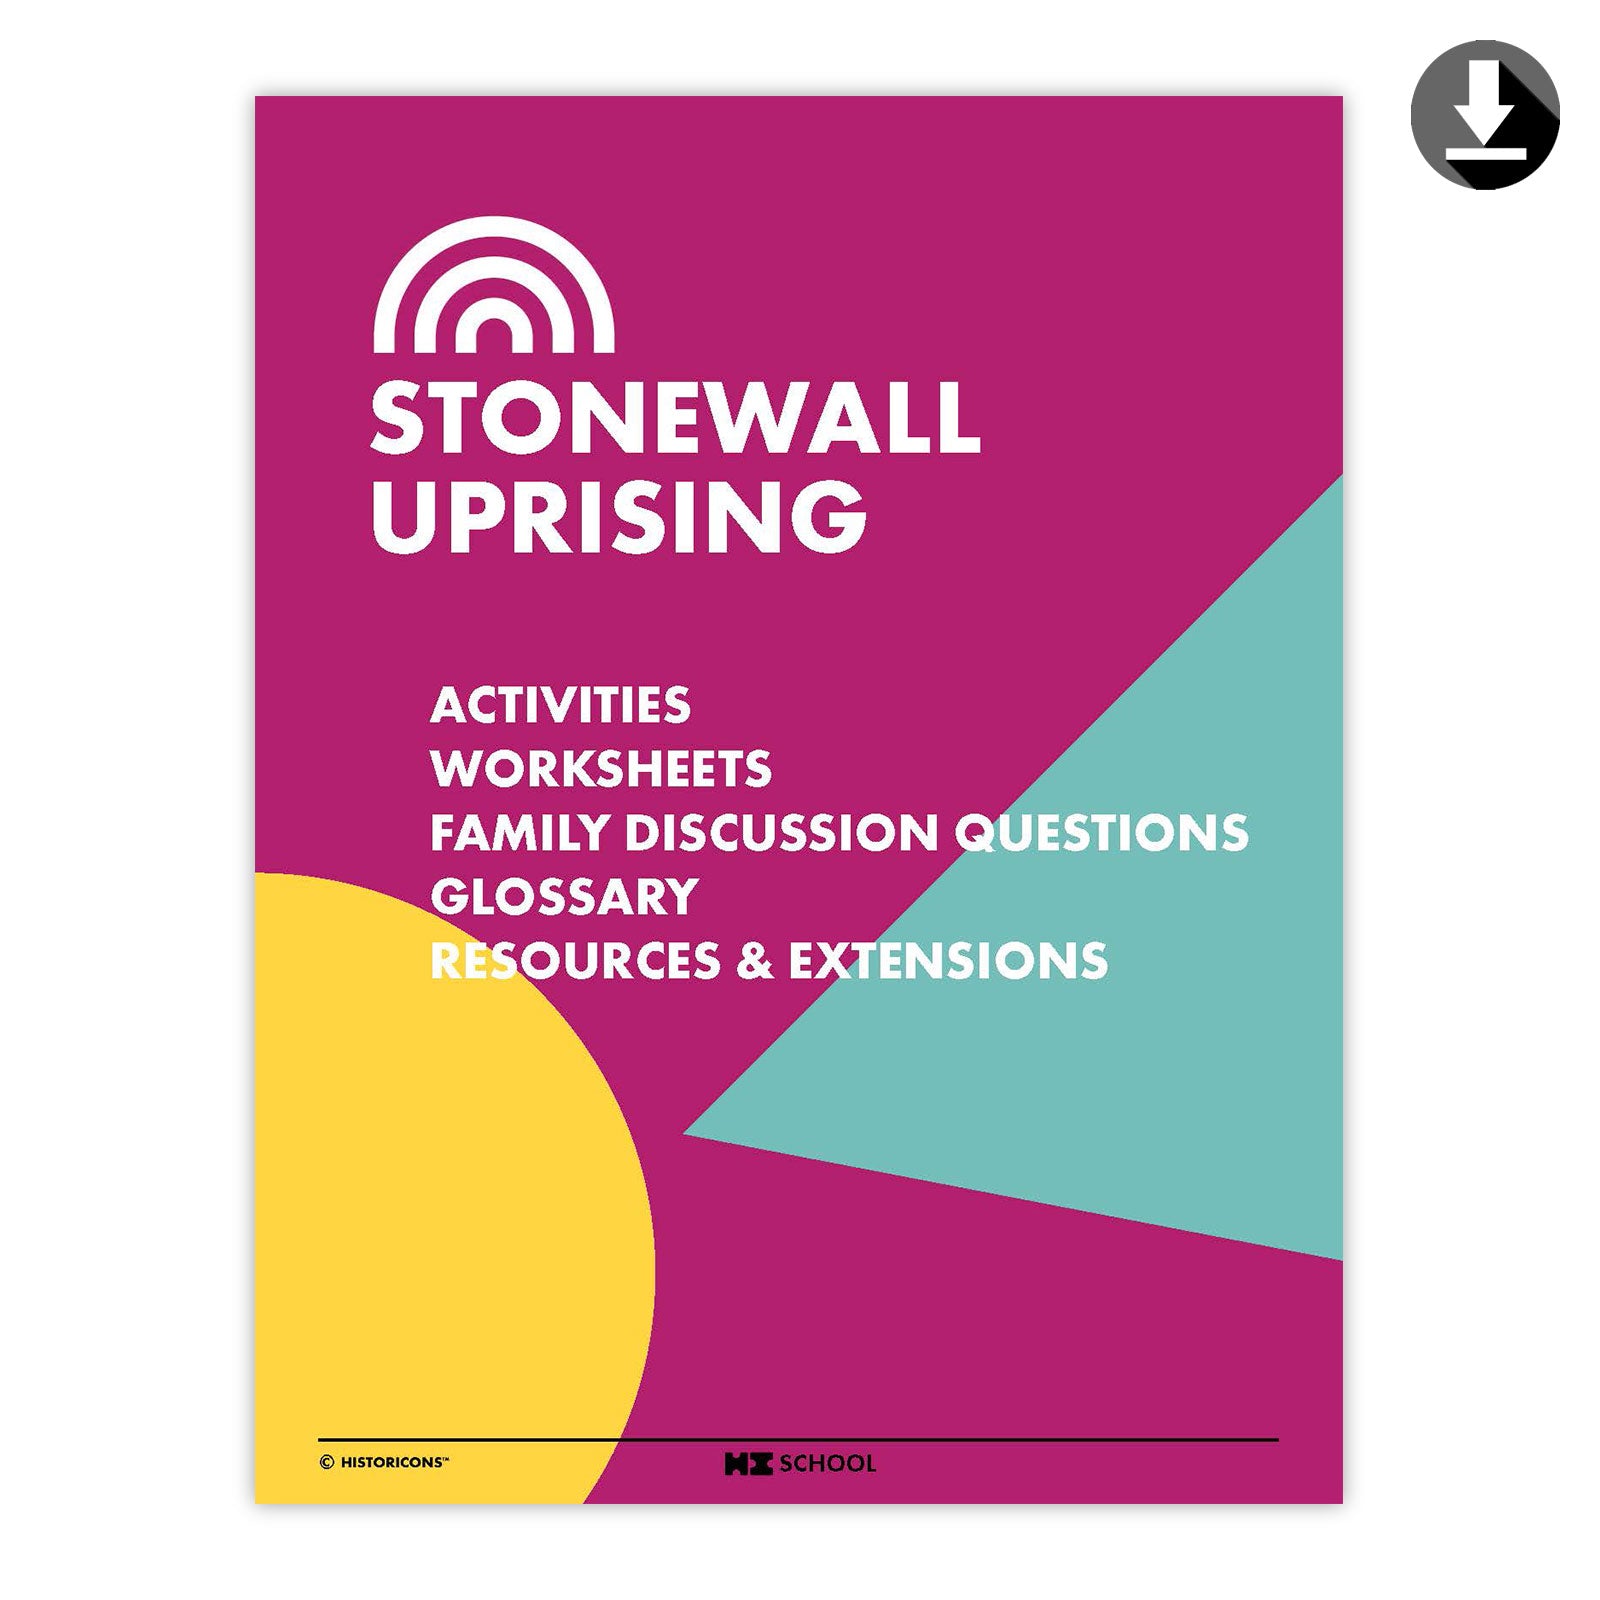 A colorful magenta, teal, and yellow cover photo of the HI School Stonewall Uprising activity pack is displayed, which shows a table of contents for fun diversity activities, Worksheets, Family Discussion Questions, Glossary, and Resources & Extensions to put allyship in action. A download symbol signifies that the activity pack is available to download as a pdf